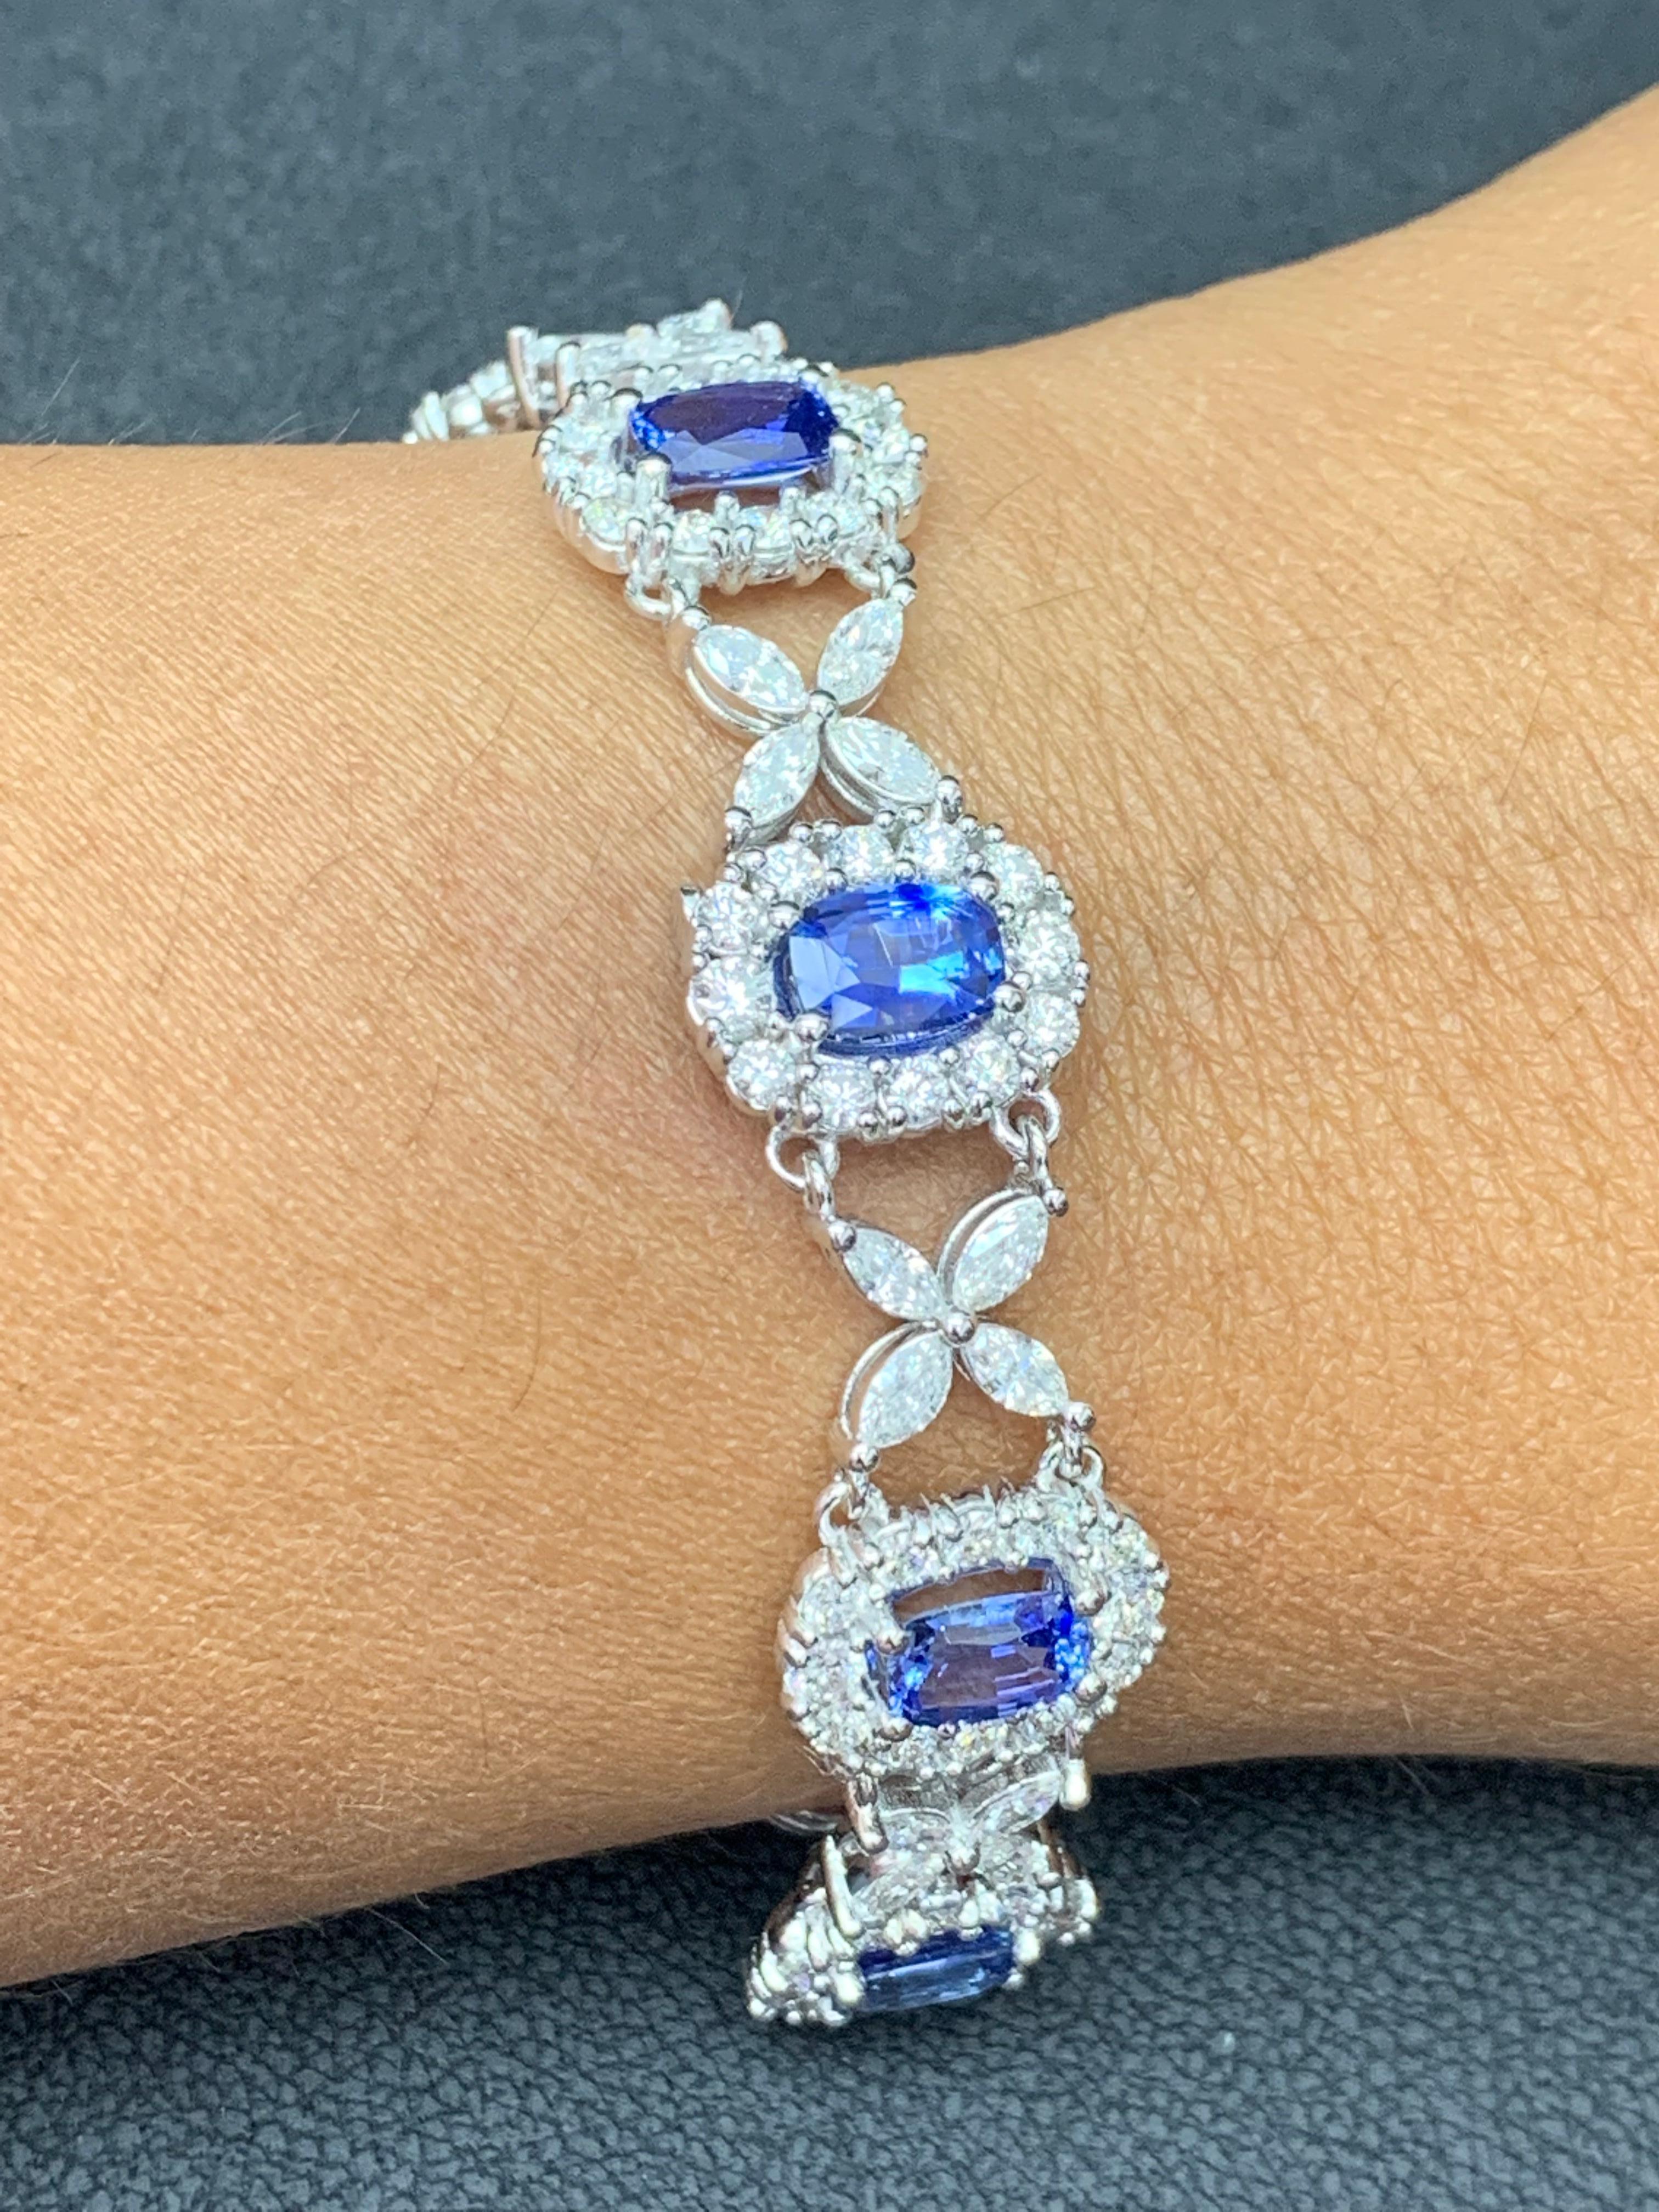 11.47 Carat Oval Cut Blue Sapphire and Diamond Tennis Bracelet in 14K White Gold For Sale 7